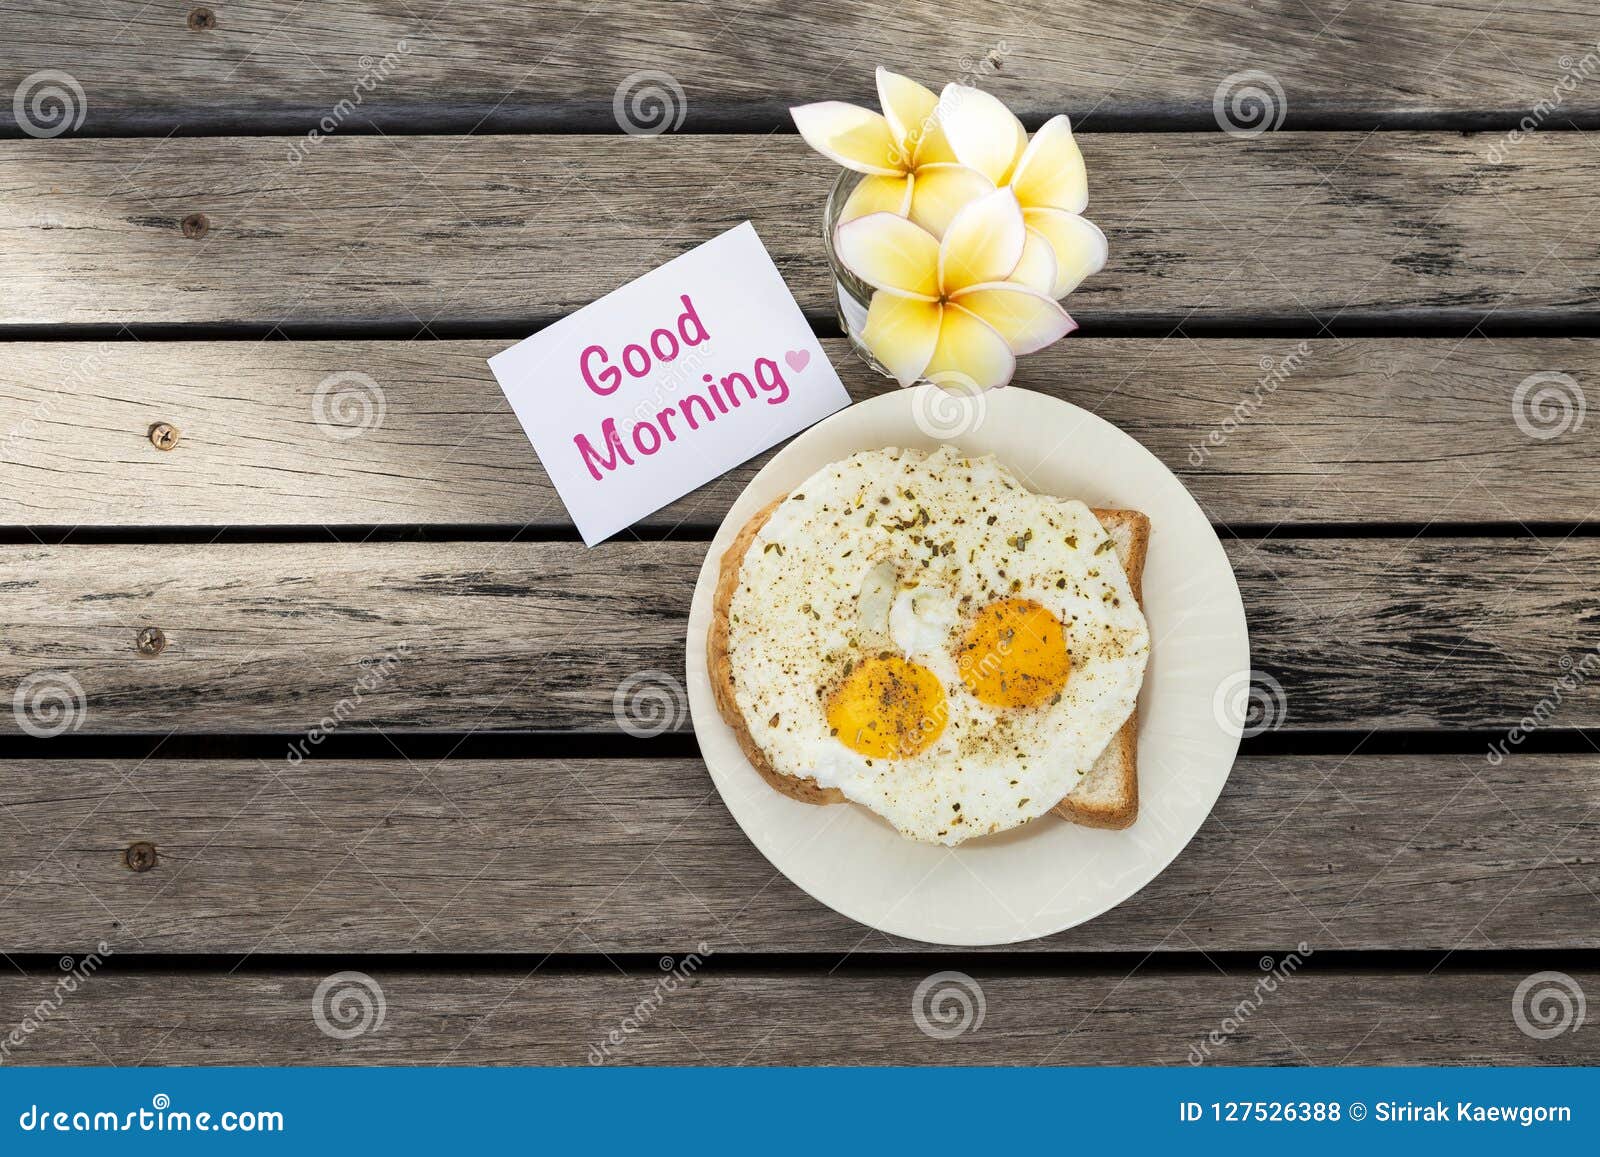 Breakfast with Good Morning Card and Beautiful Flower on Wood ...